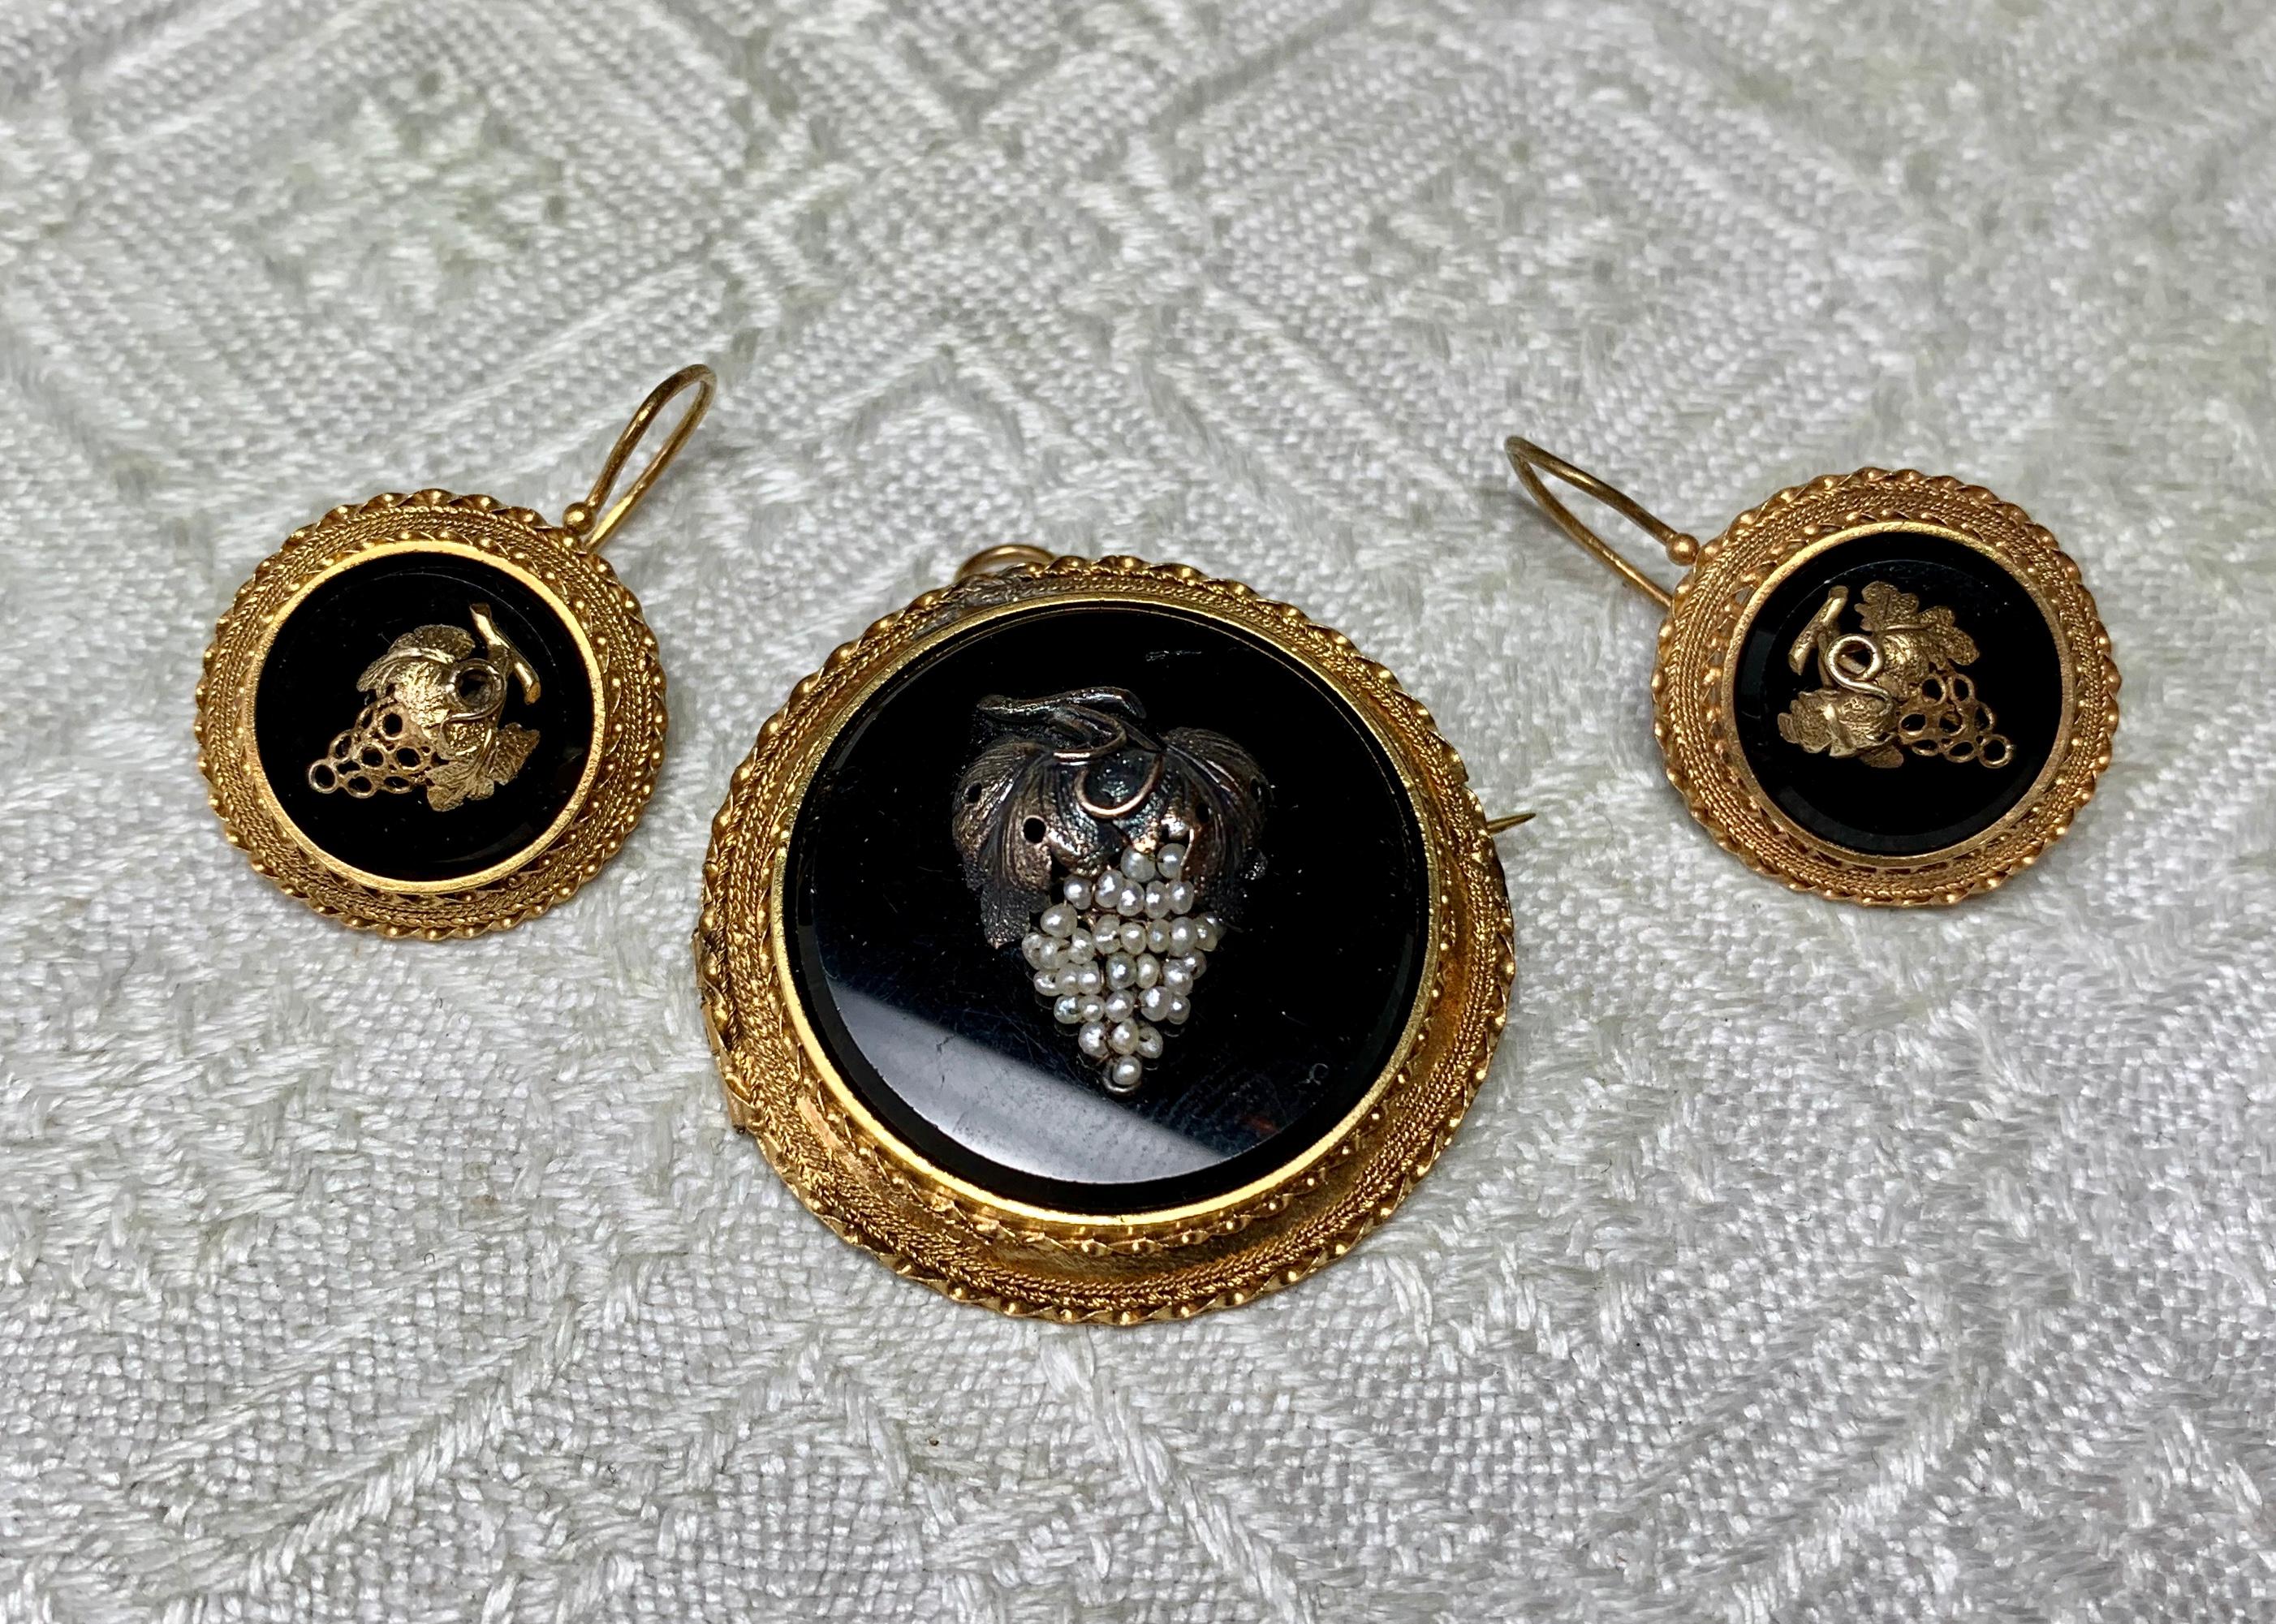 A SUITE OF GRAPE MOTIF VICTORIAN ETRUSCAN REVIVAL EARRINGS WITH THE MATCHING PENDANT/BROOCH.  THE JEWELS ARE SET WITH STUNNING GRAPE CLUSTERS IN THE CENTER, MOUNTED ON BLACK ONYX.  THE GOLD WORK IS GORGEOUS 14-16K GOLD IN A BRAIDED ETRUSCAN MOTIF. 